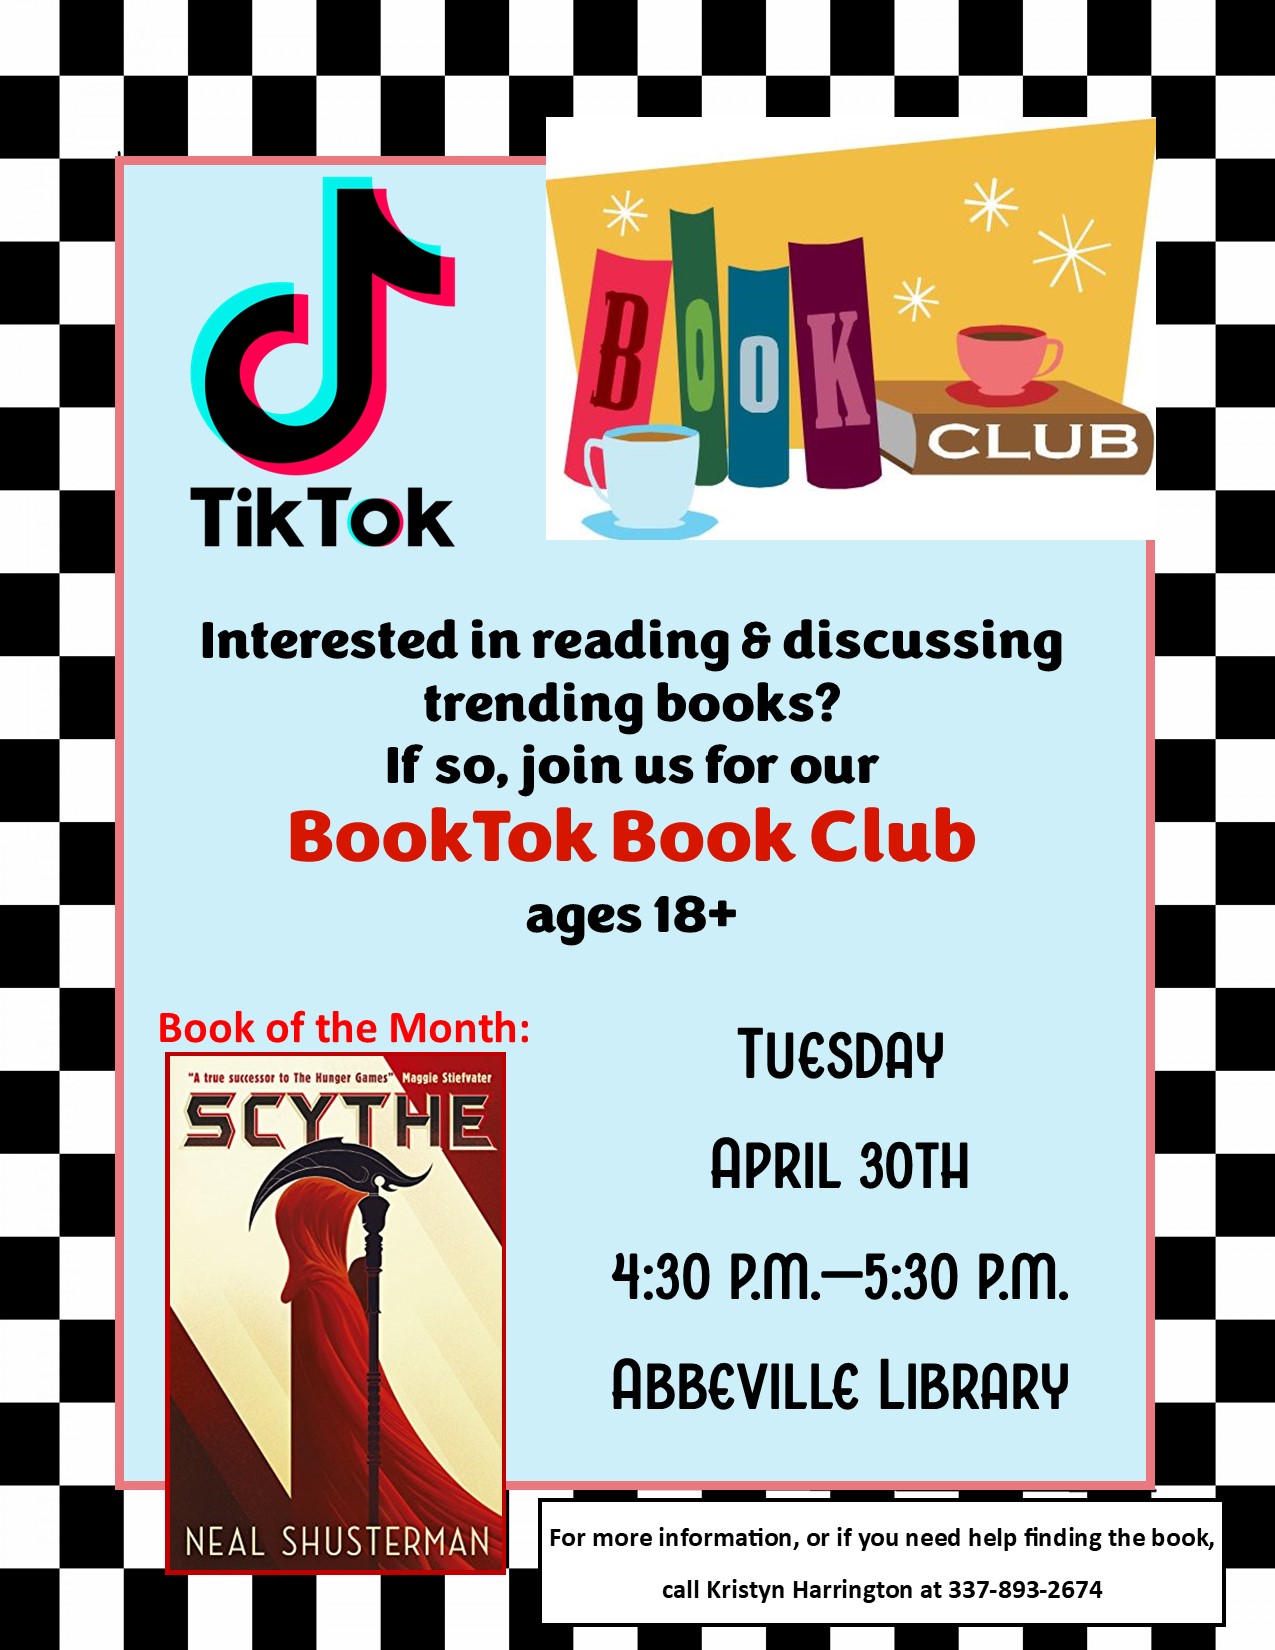 BookTok Book Club for Ages 18+